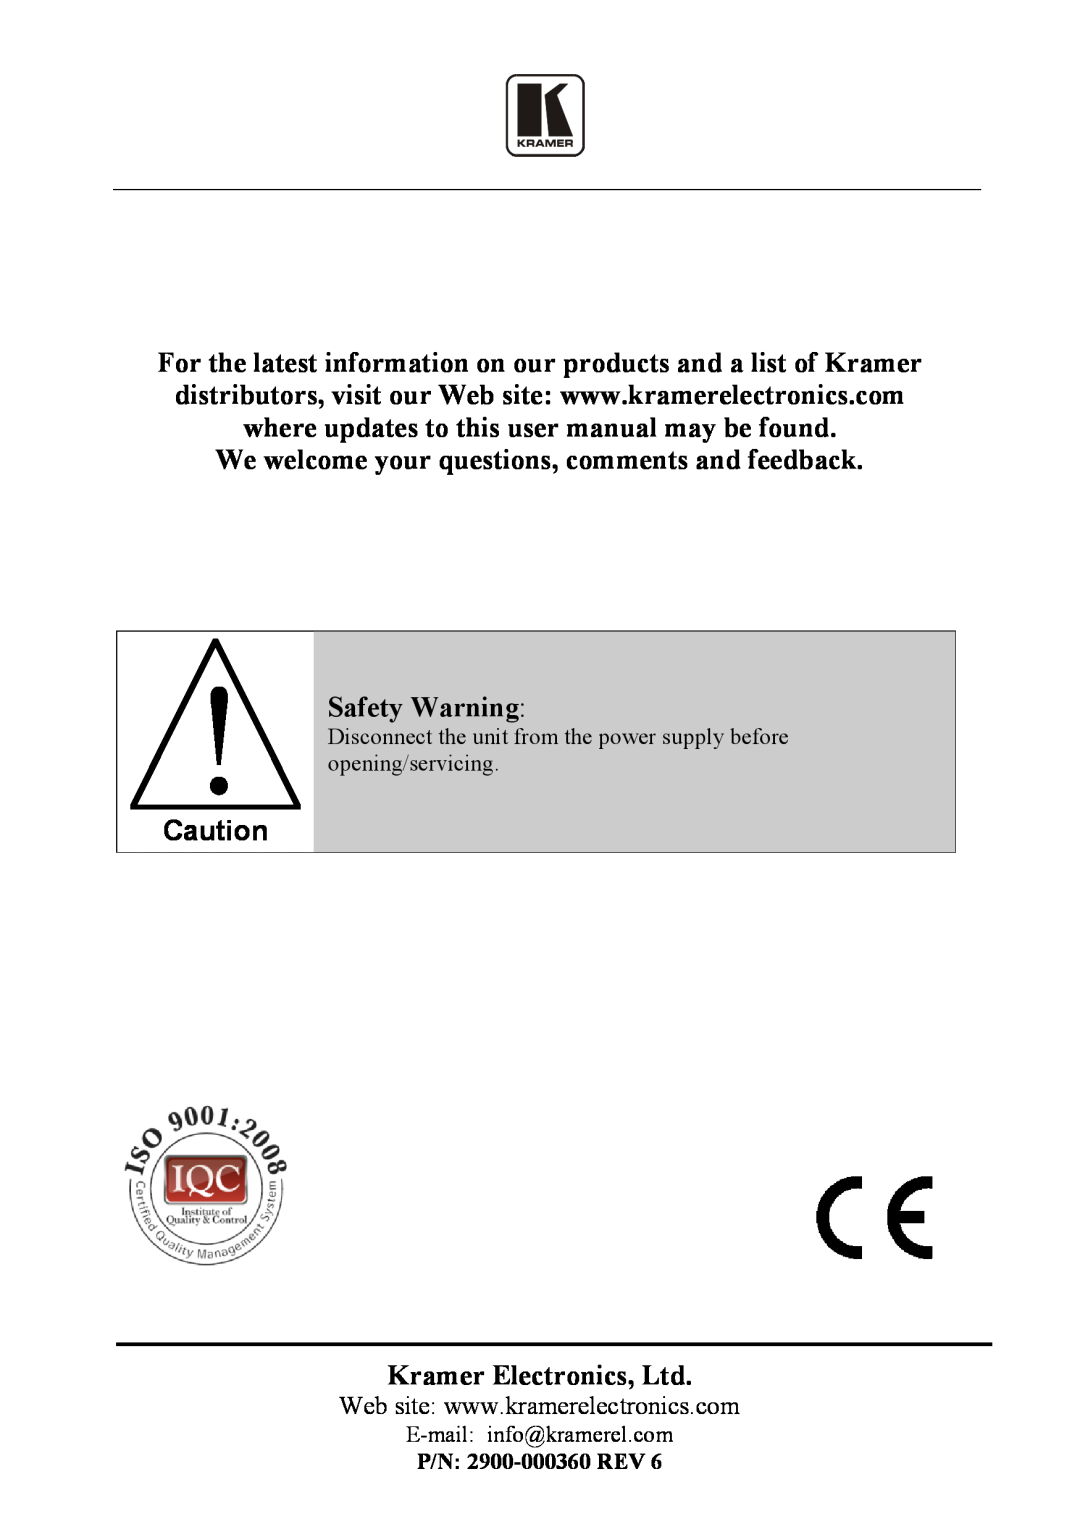 Kramer Electronics VS-66hdcp We welcome your questions, comments and feedback Safety Warning, P/N 2900-000360 REV 